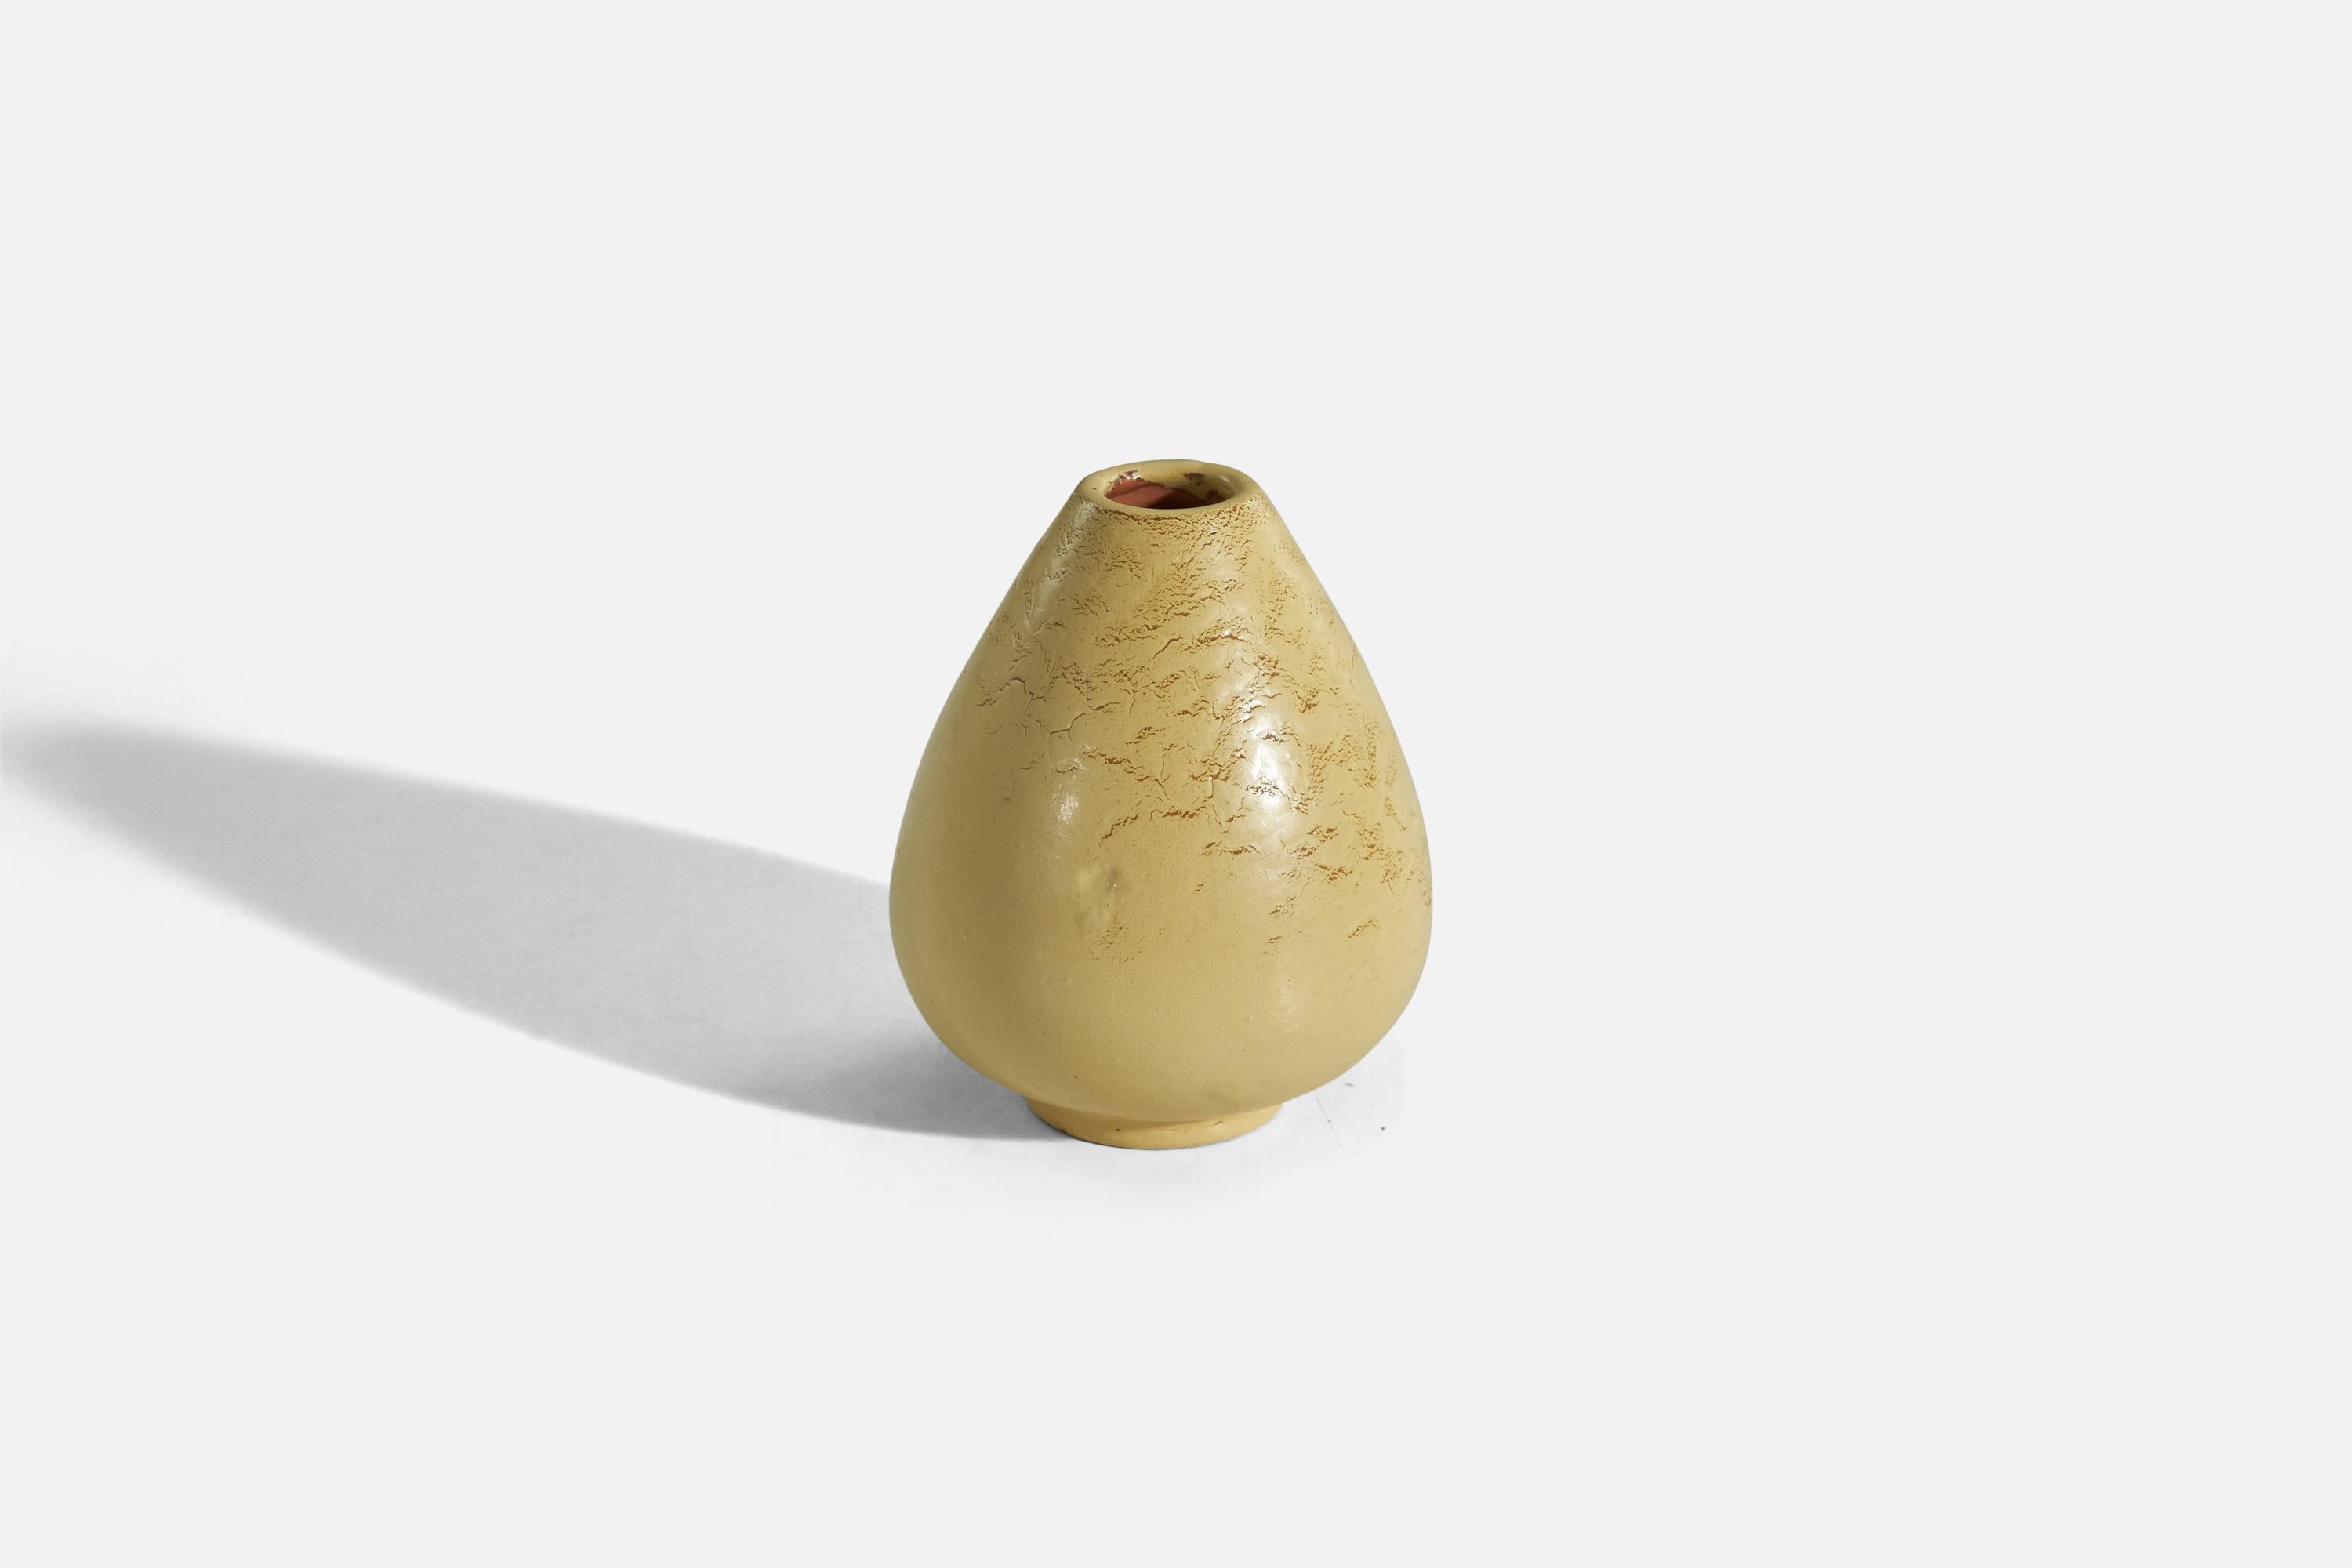 A yellow, glazed earthenware vase designed and produced by Upsala-Ekeby, Sweden, 1940s.

